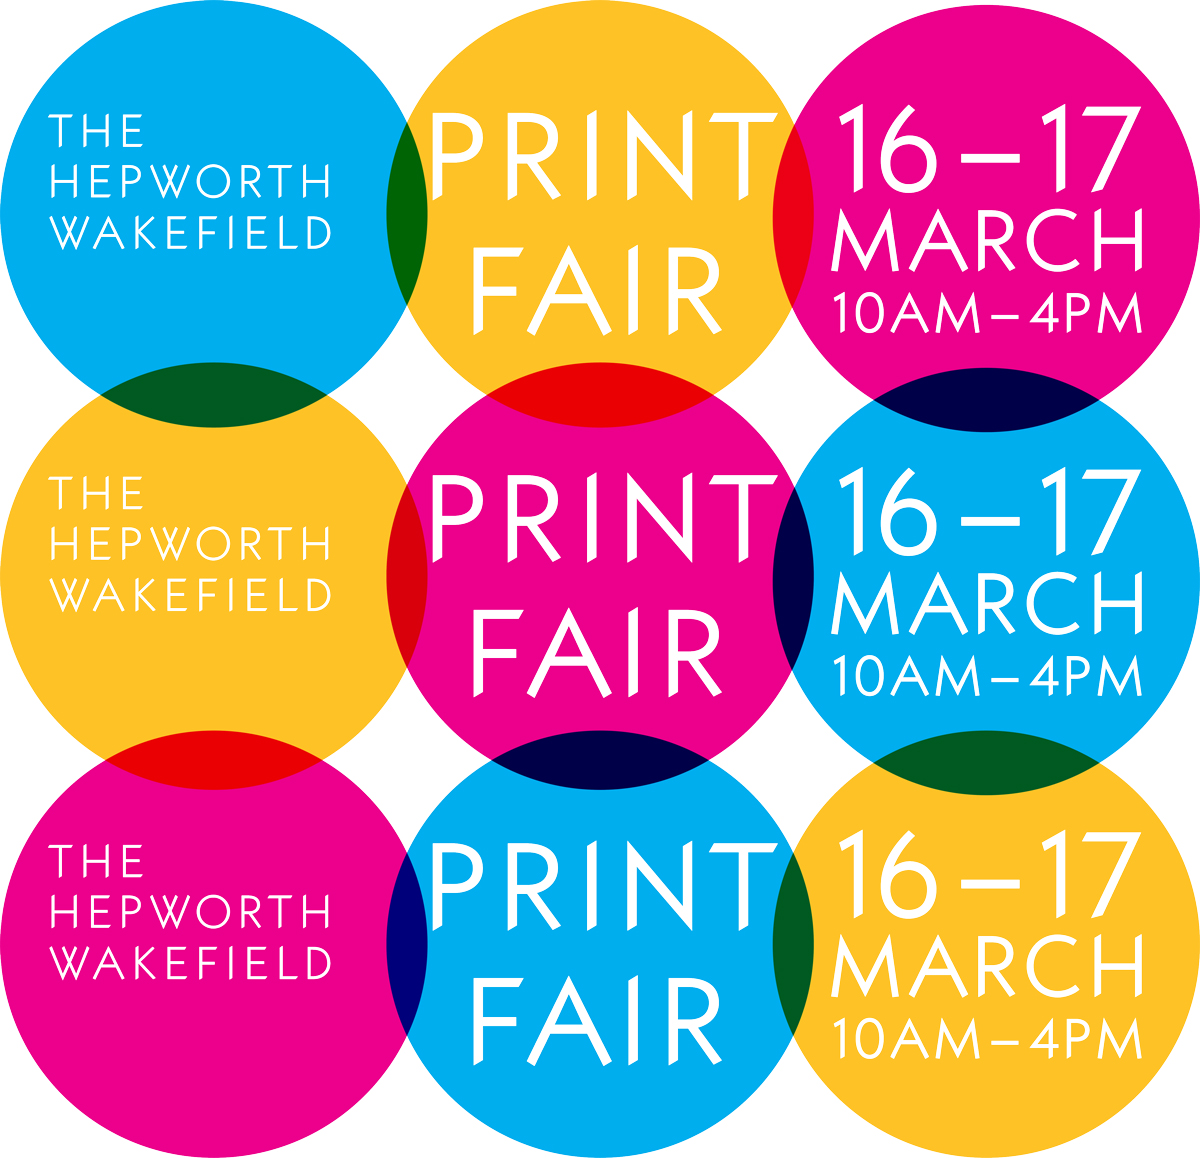 Join us today for day 2 of The Hepworth Wakefield Print Fair! Plus family activities, street food, new exhibitions & discounted gallery entry. hepworthwakefield.org/whats-on/the-h… Event partner: @TileyardNorth #printfair #market #artfair